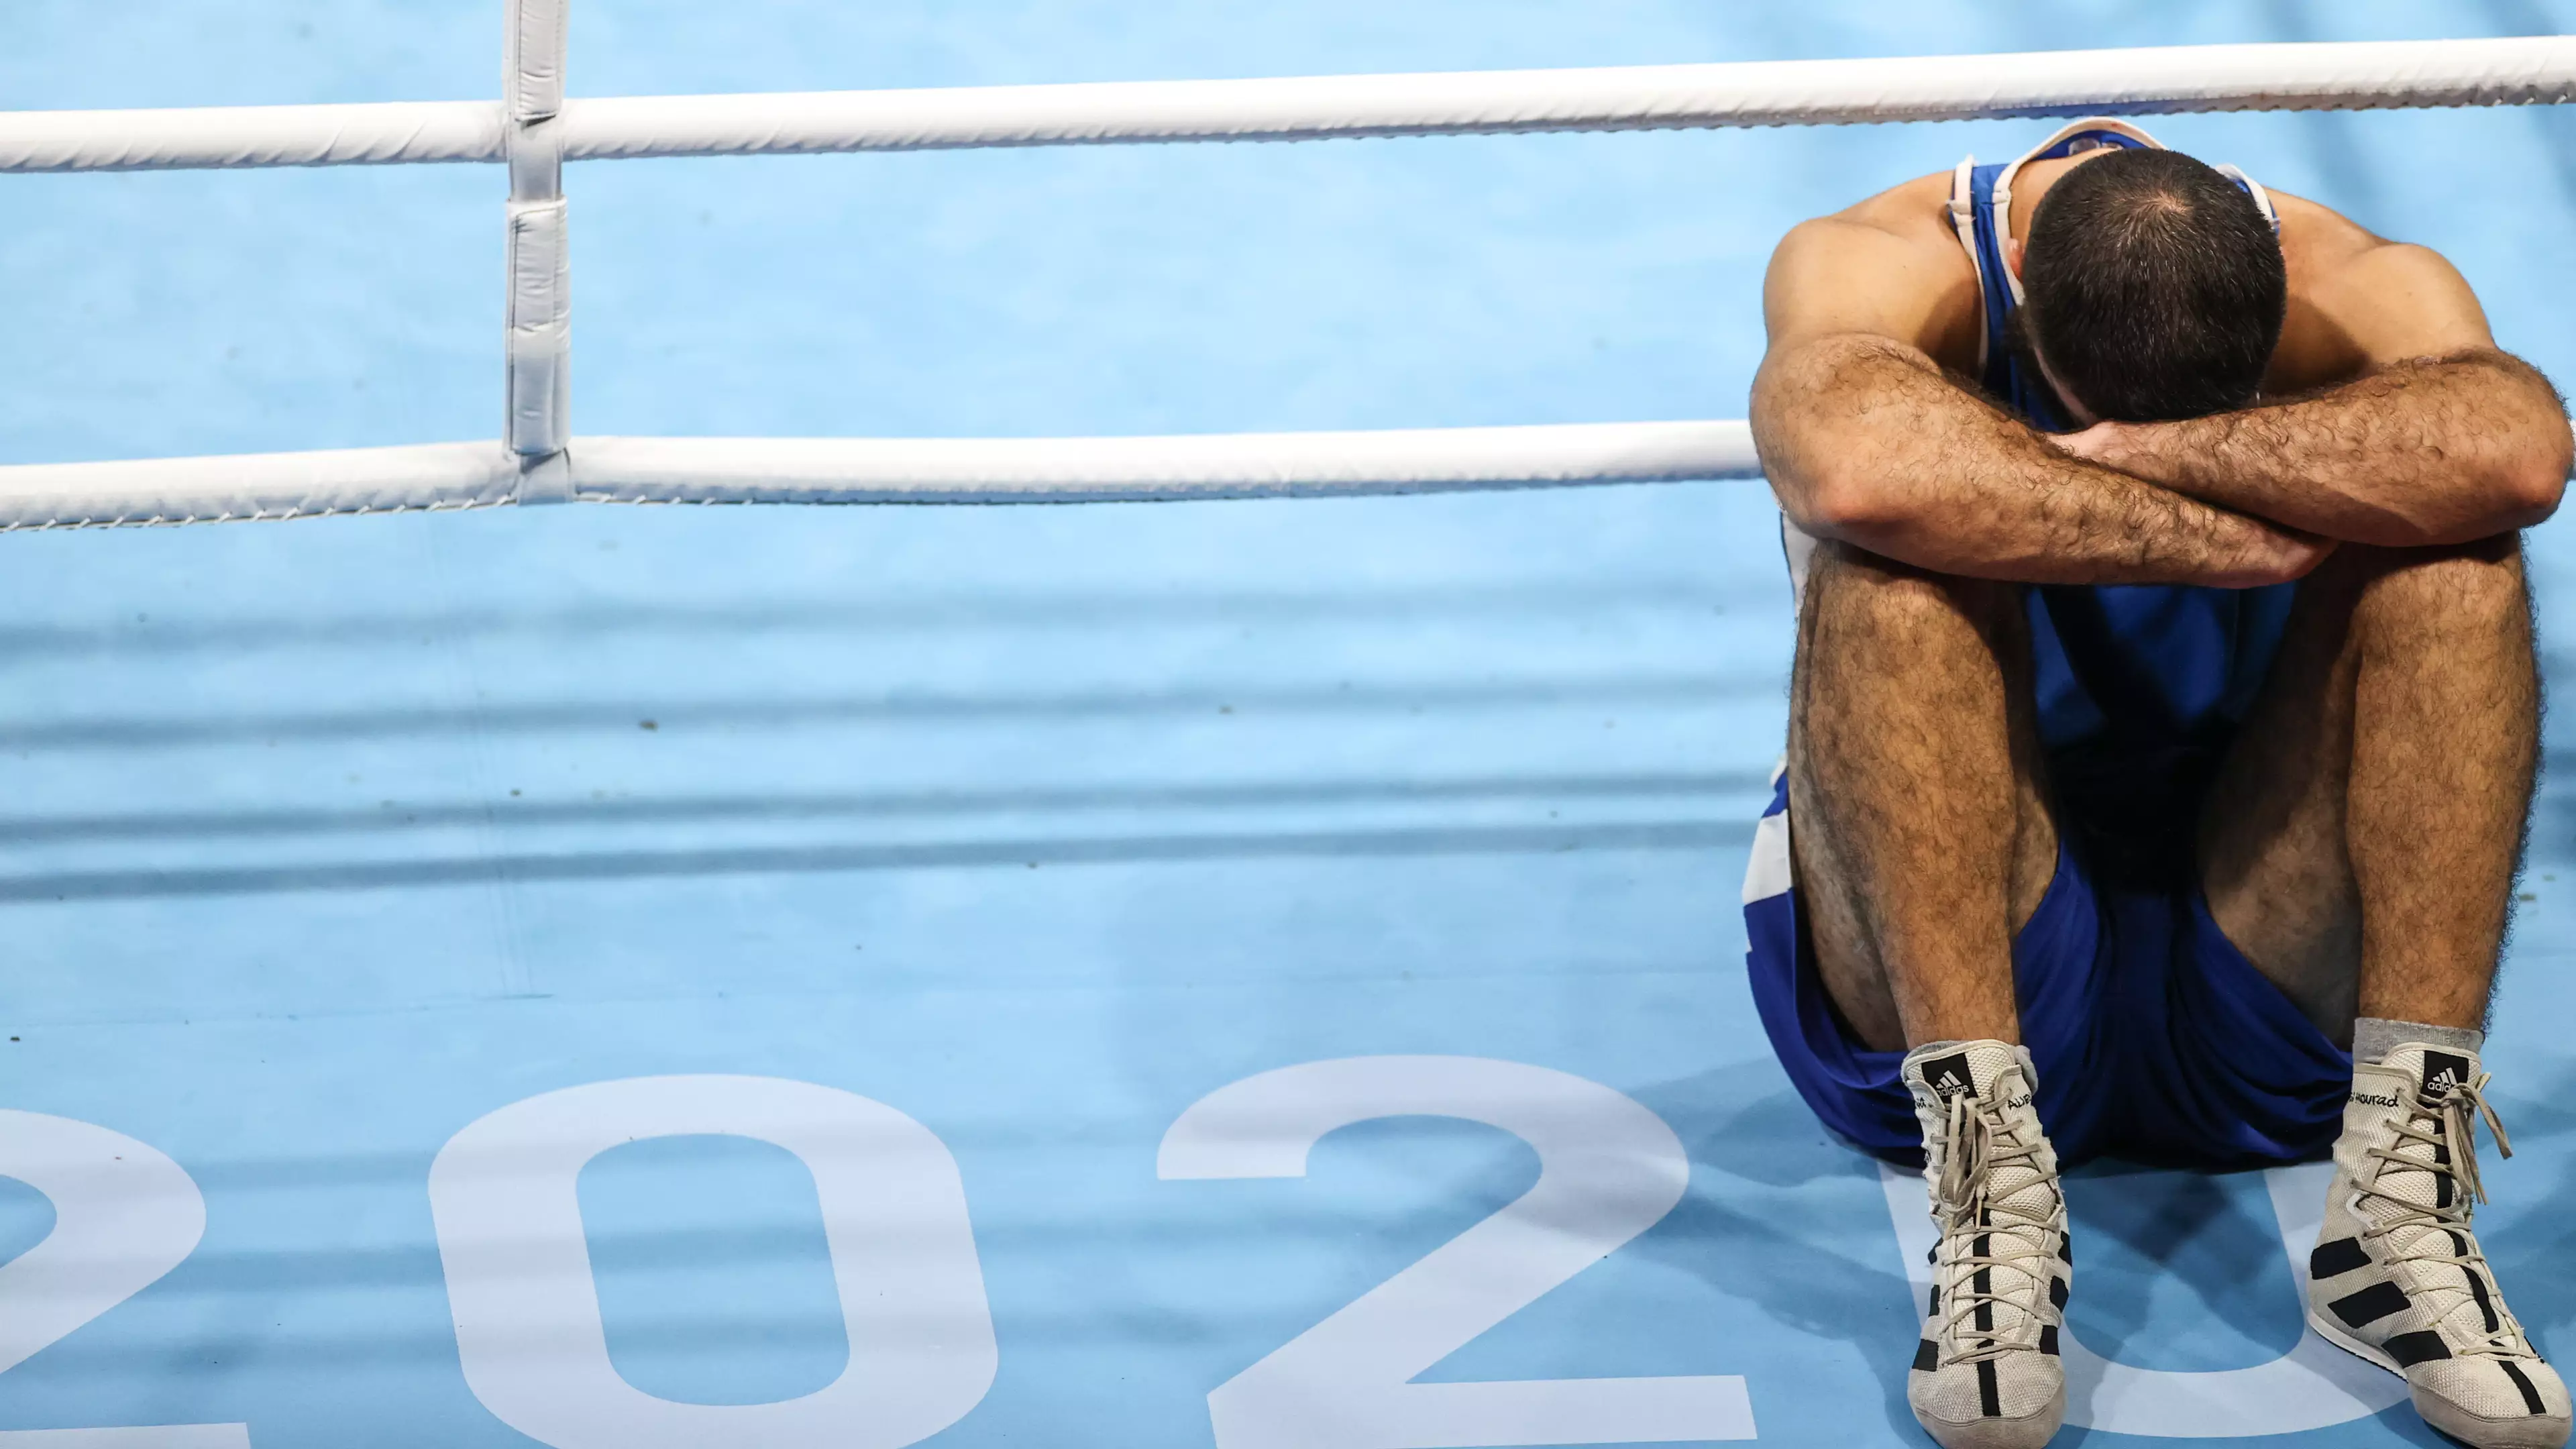 Olympic Boxer Throws Tantrum And Stages Protest After Disqualification Against British Fighter